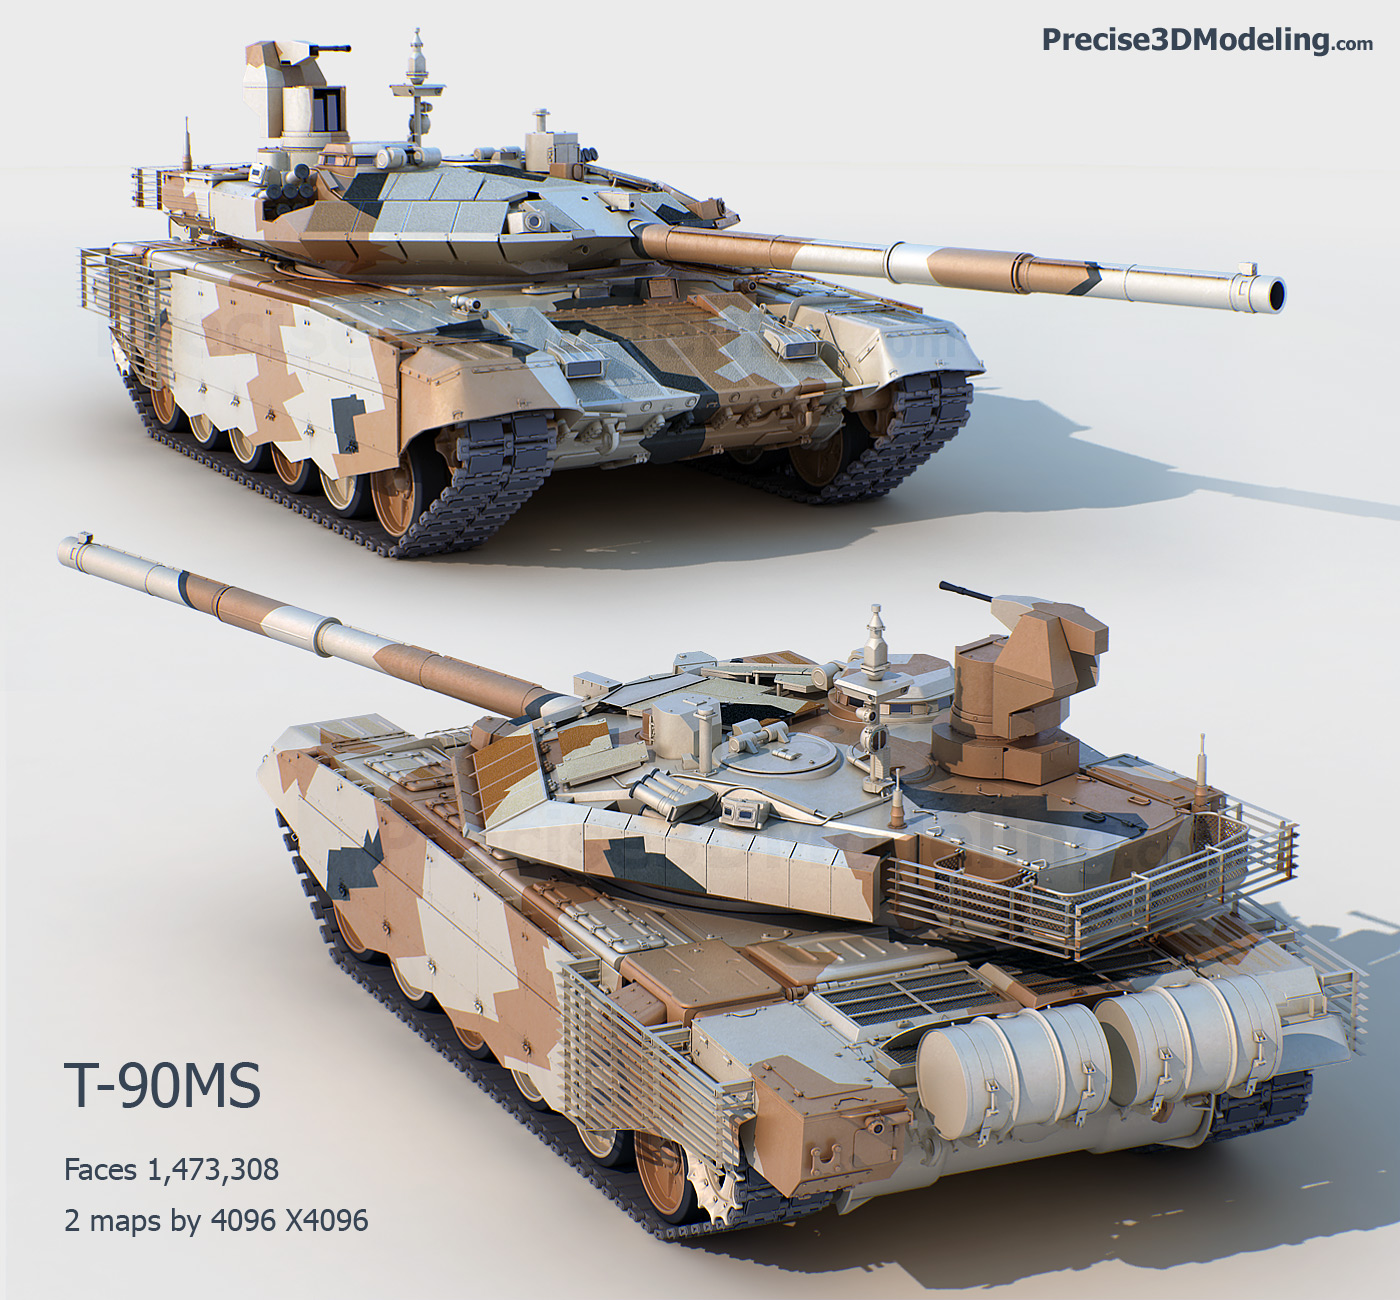 11gs_t-90ms_front_large1.jpg